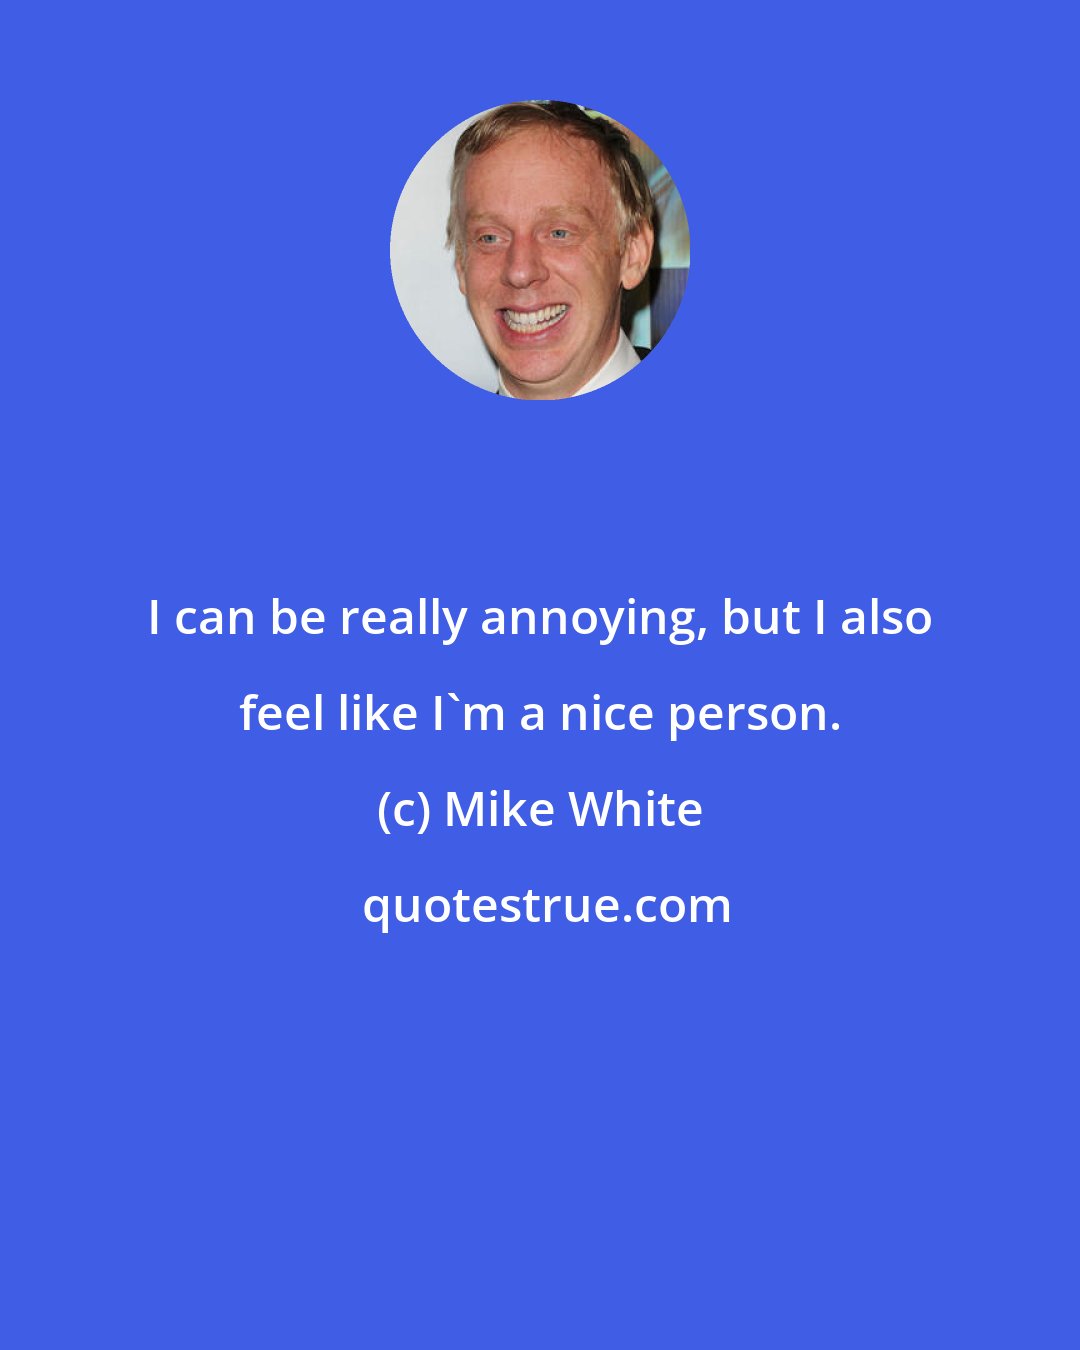 Mike White: I can be really annoying, but I also feel like I'm a nice person.